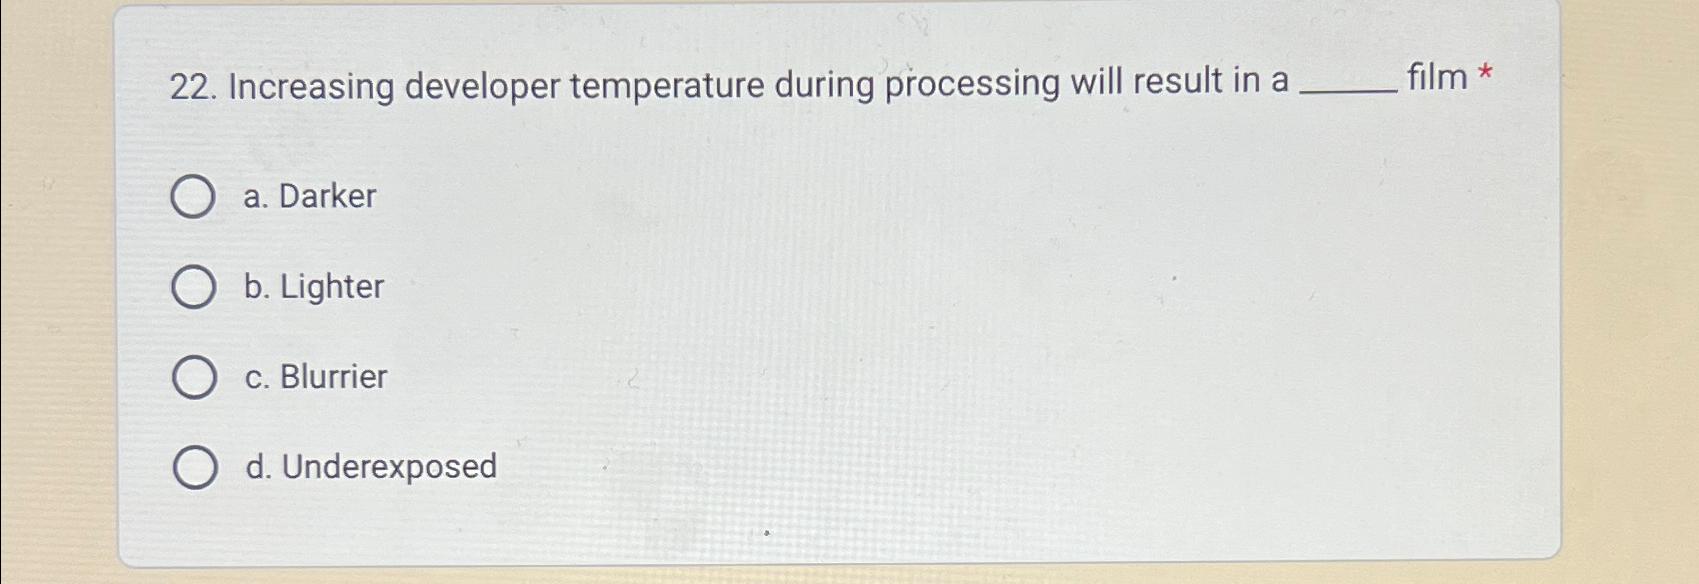 22. Increasing developer temperature during processing will result in a O a. Darker O b. Lighter c. Blurrier